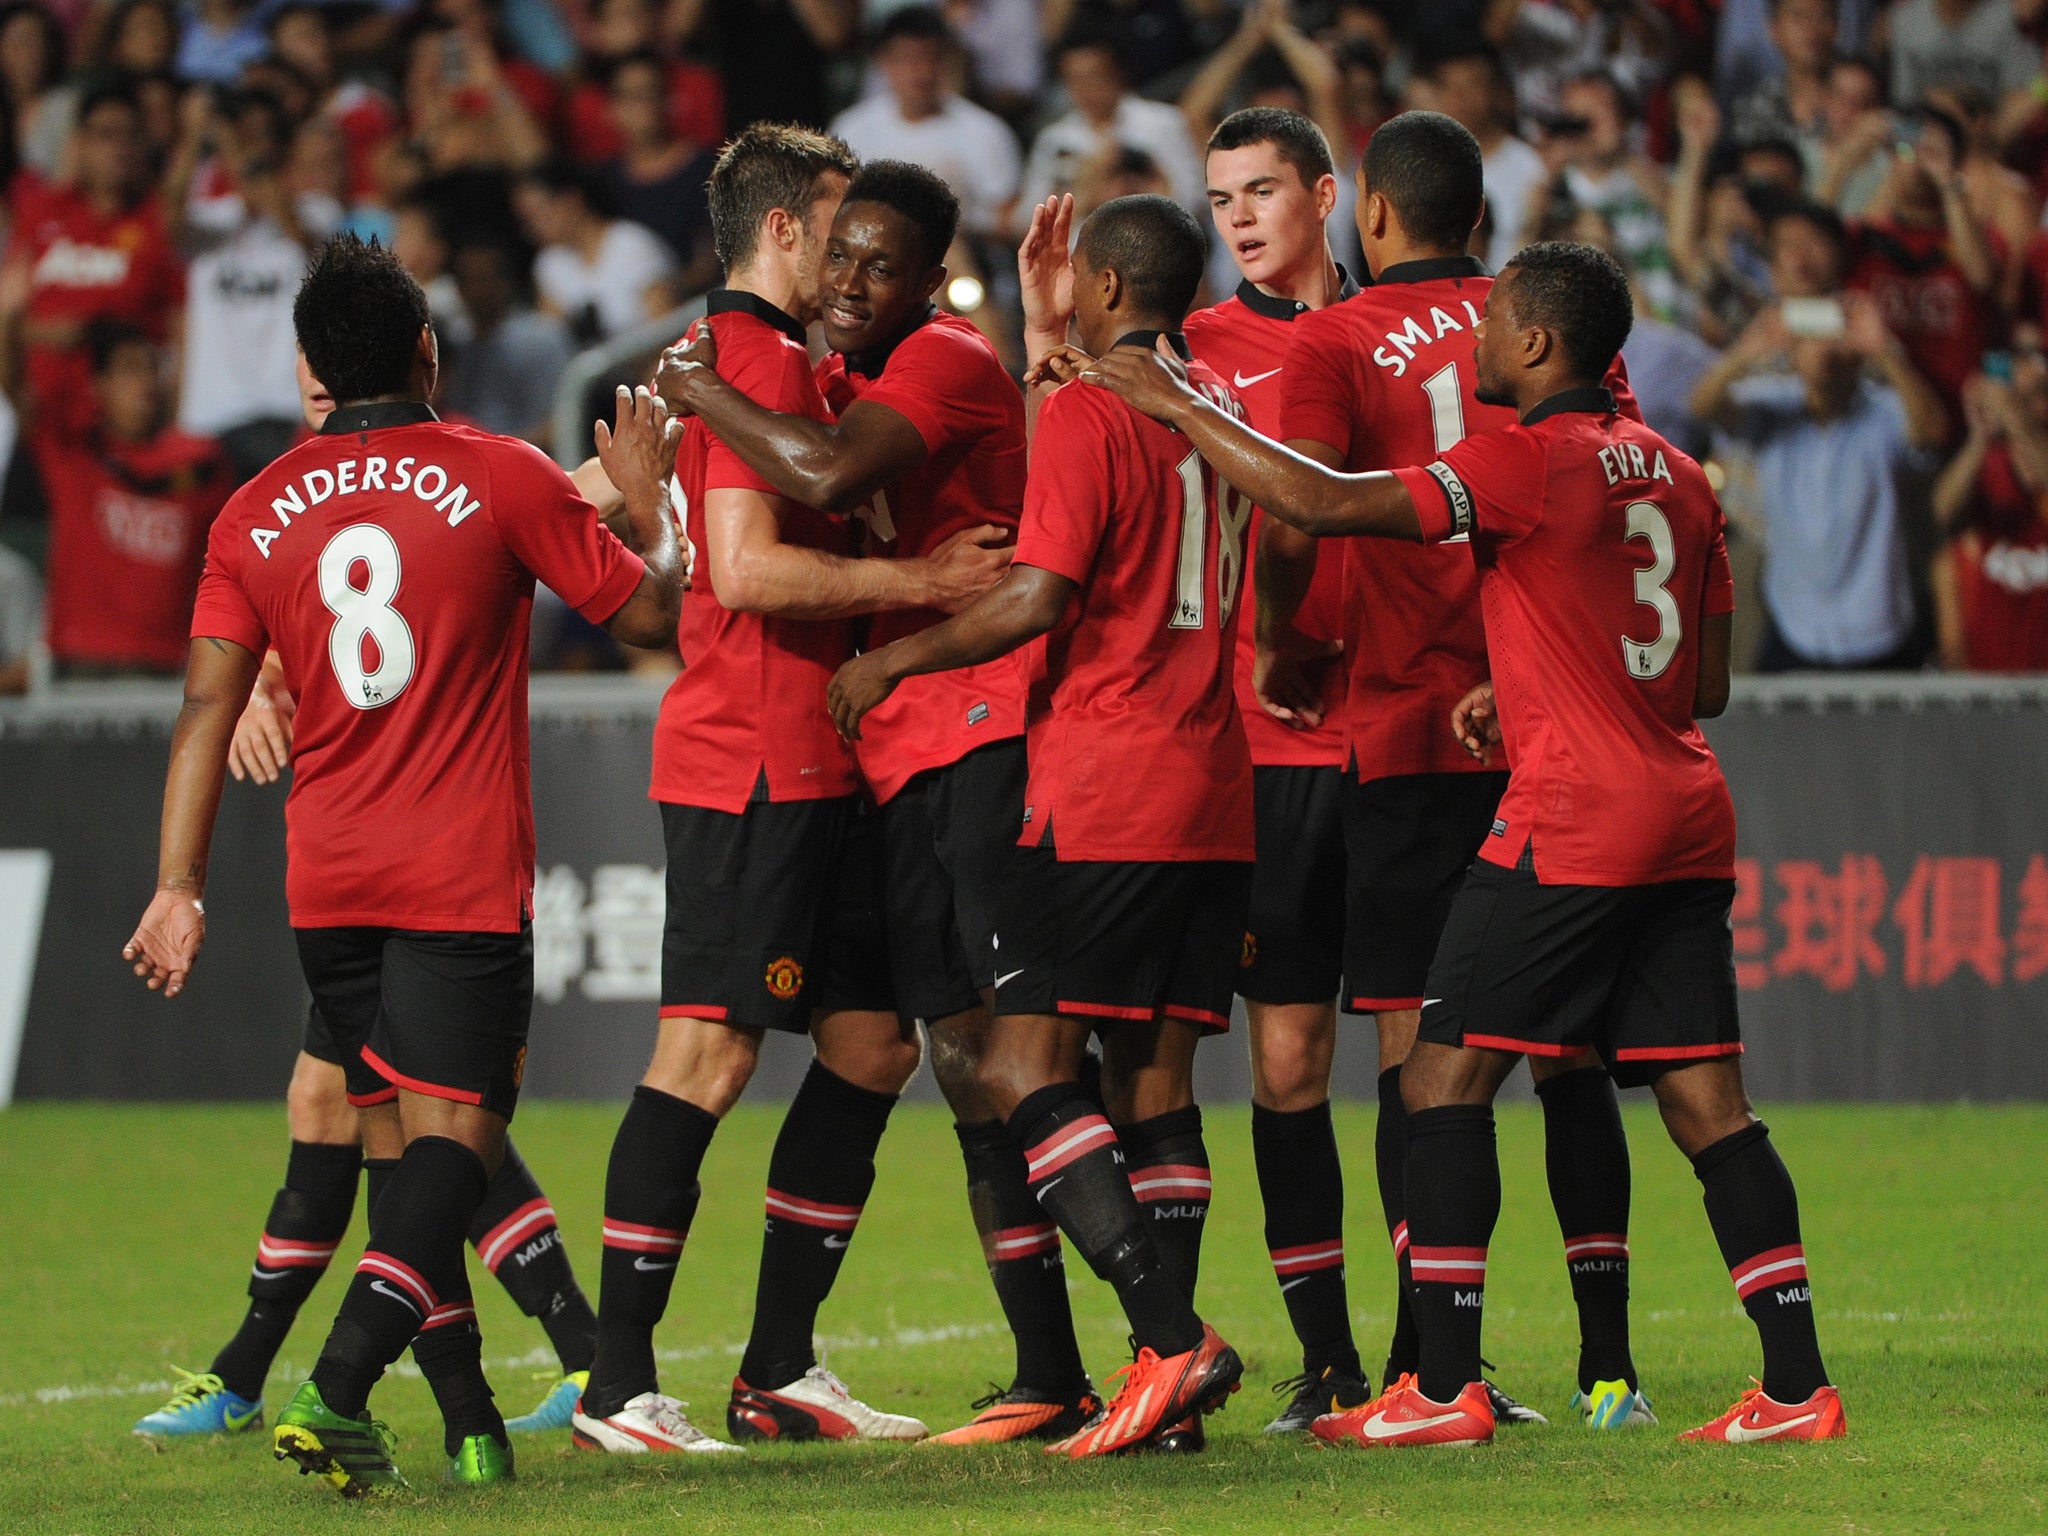 Danny Welbeck celebrates with the rest of the Manchester United team after he opens the scoring against Kitchee FC